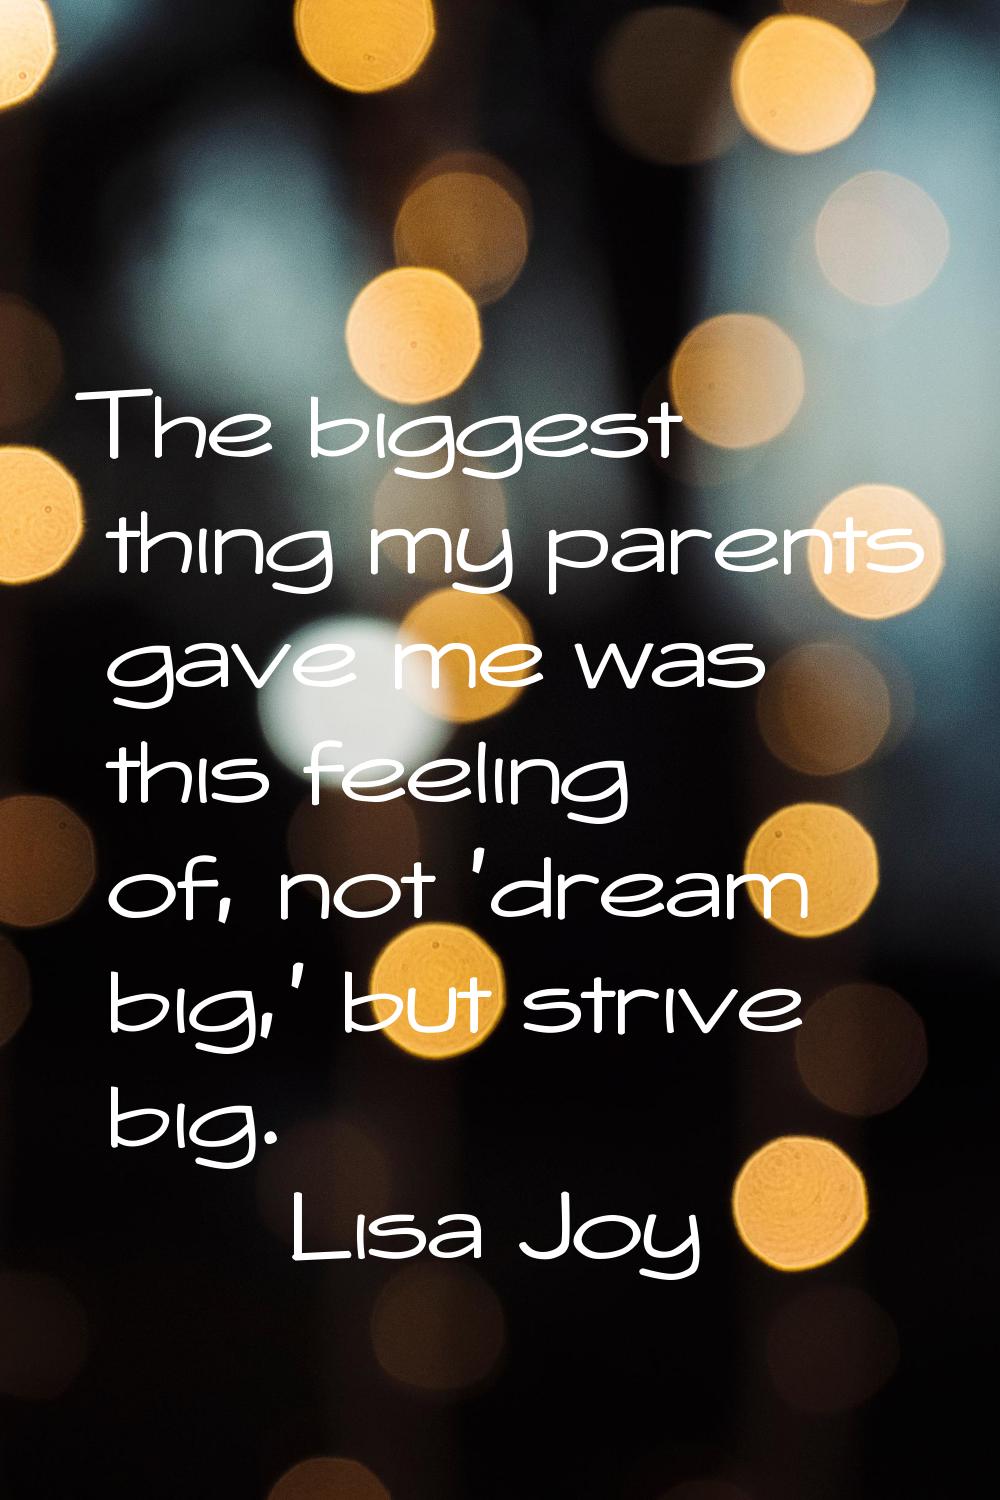 The biggest thing my parents gave me was this feeling of, not 'dream big,' but strive big.